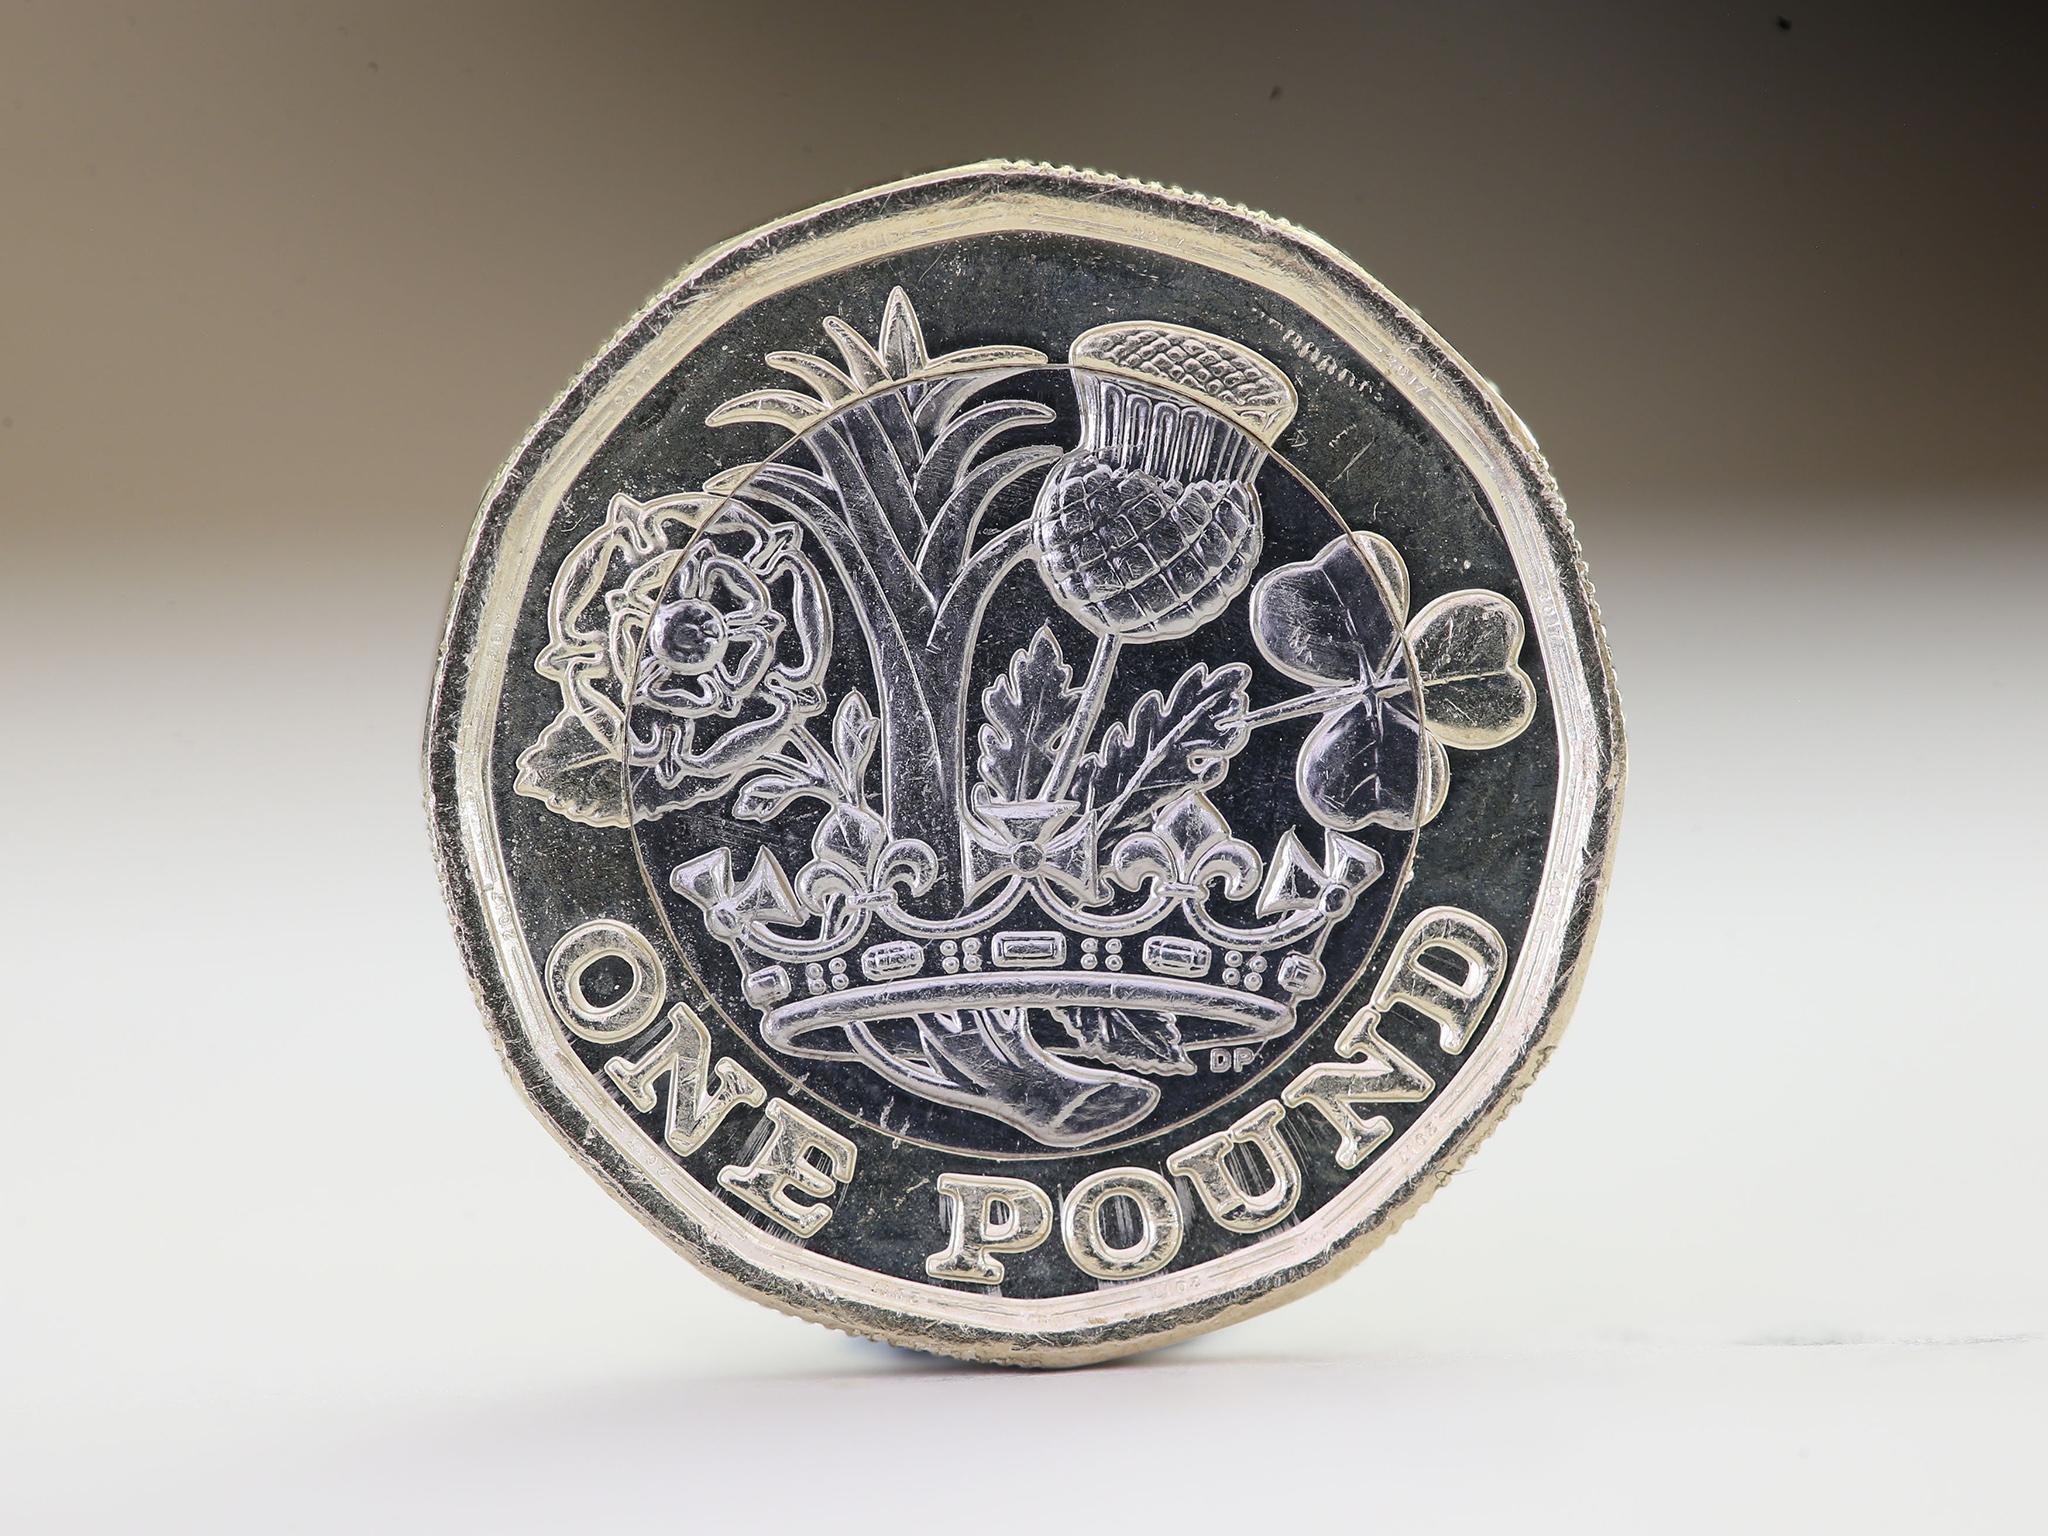 The new £1 coin is being phased into circulation